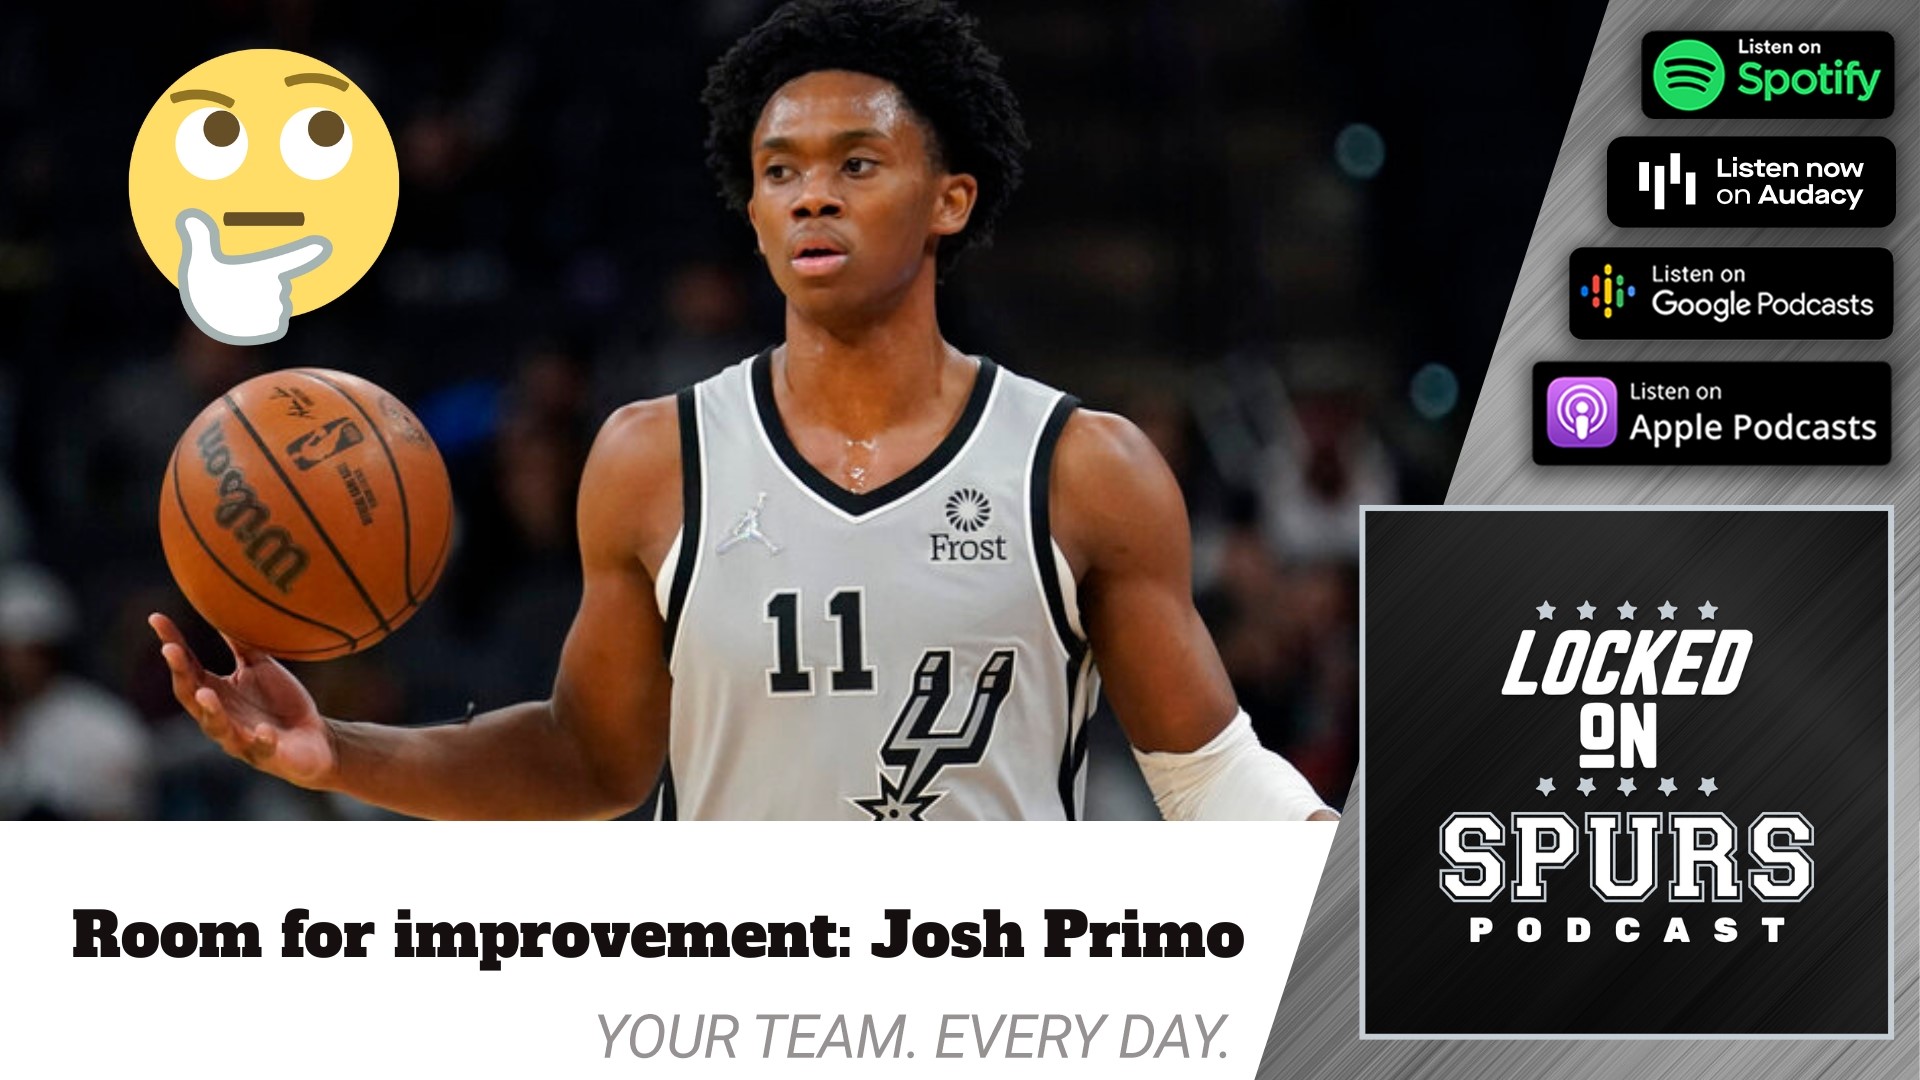 What on-the-court growth do we wan to see from Primo next season?